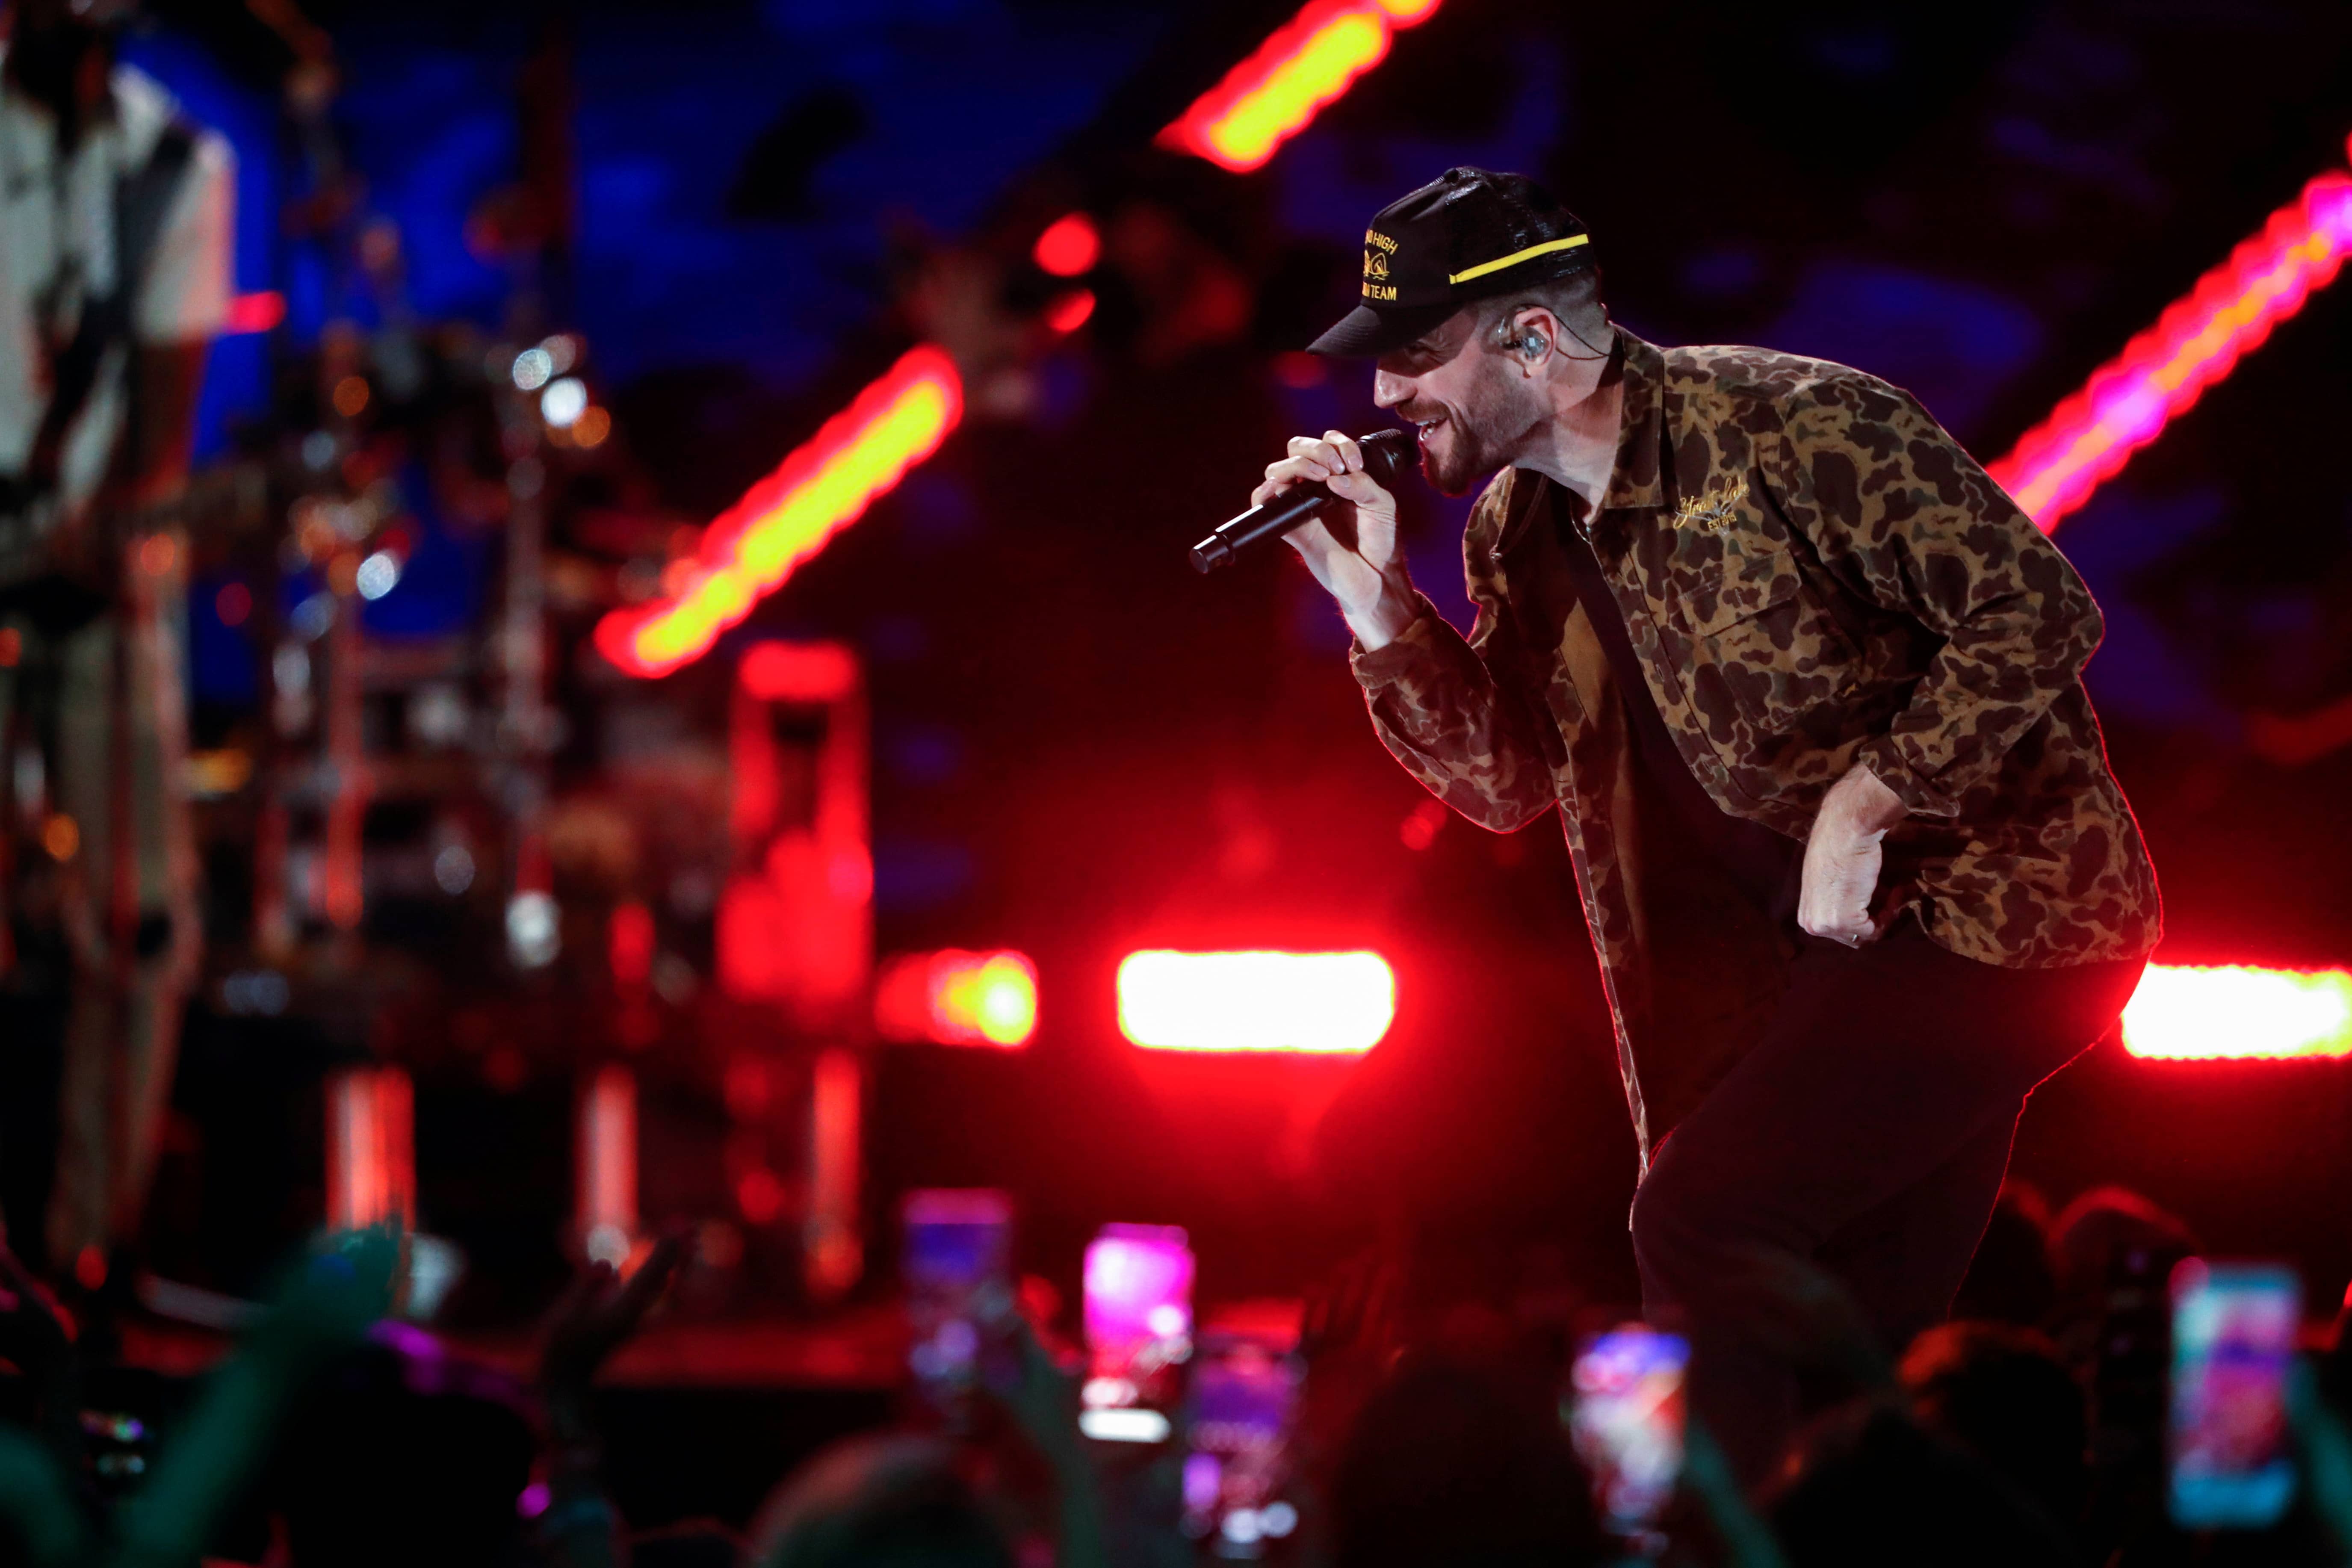 sam-hunt-performs-during-the-second-day-of-the-iheartradio-music-festival-at-the-t-mobile-arena-in-las-vegas-3